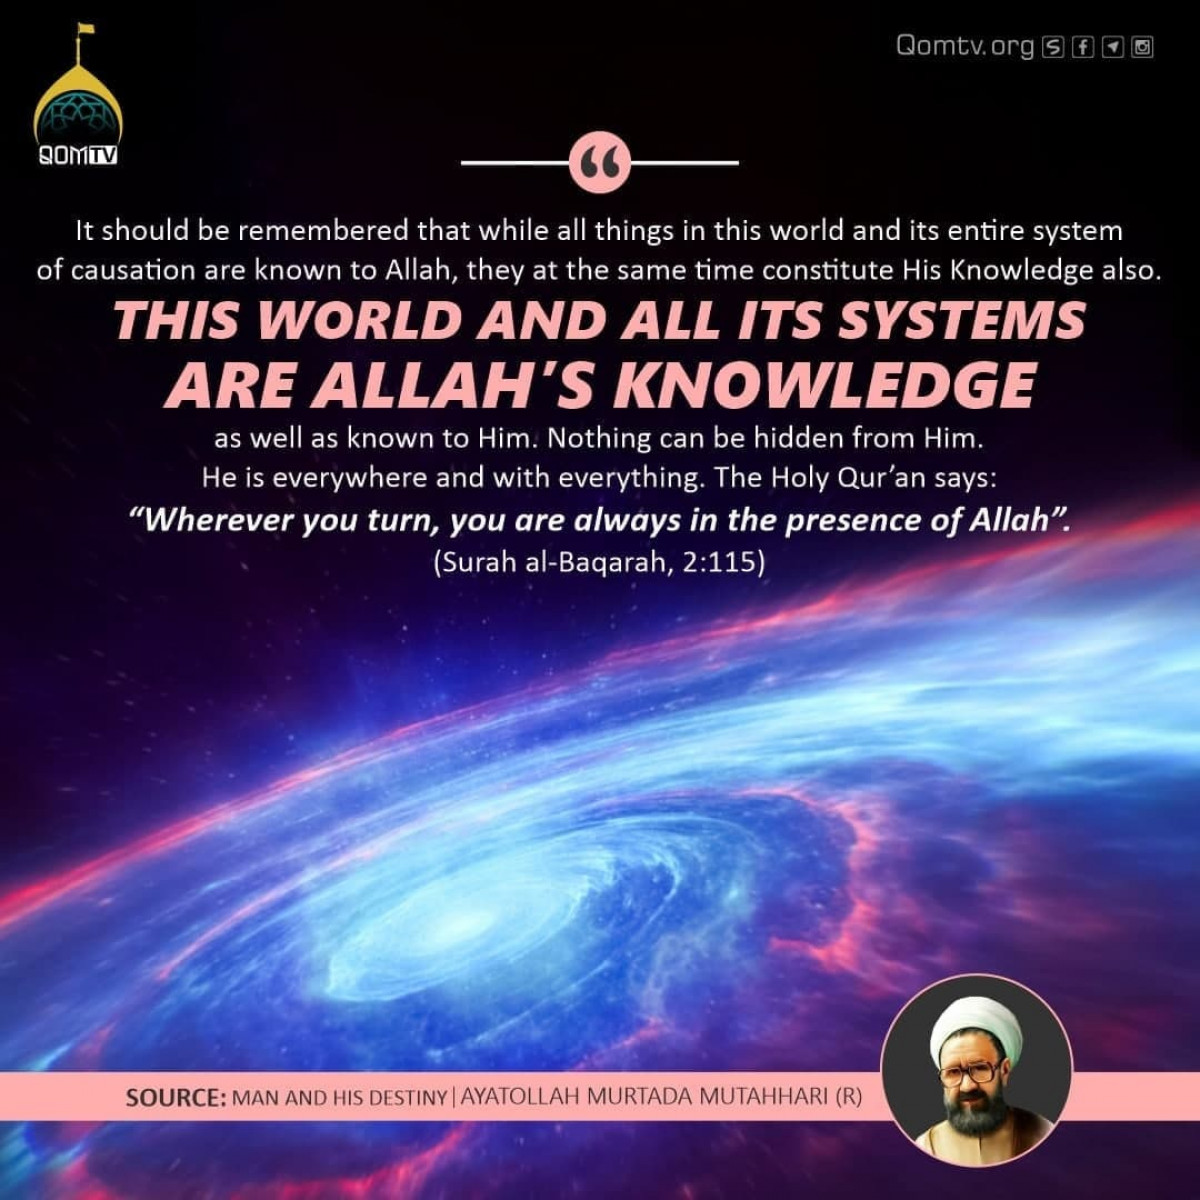 It should be remembered that while all things in this world and its entire system of causation are known to Allah